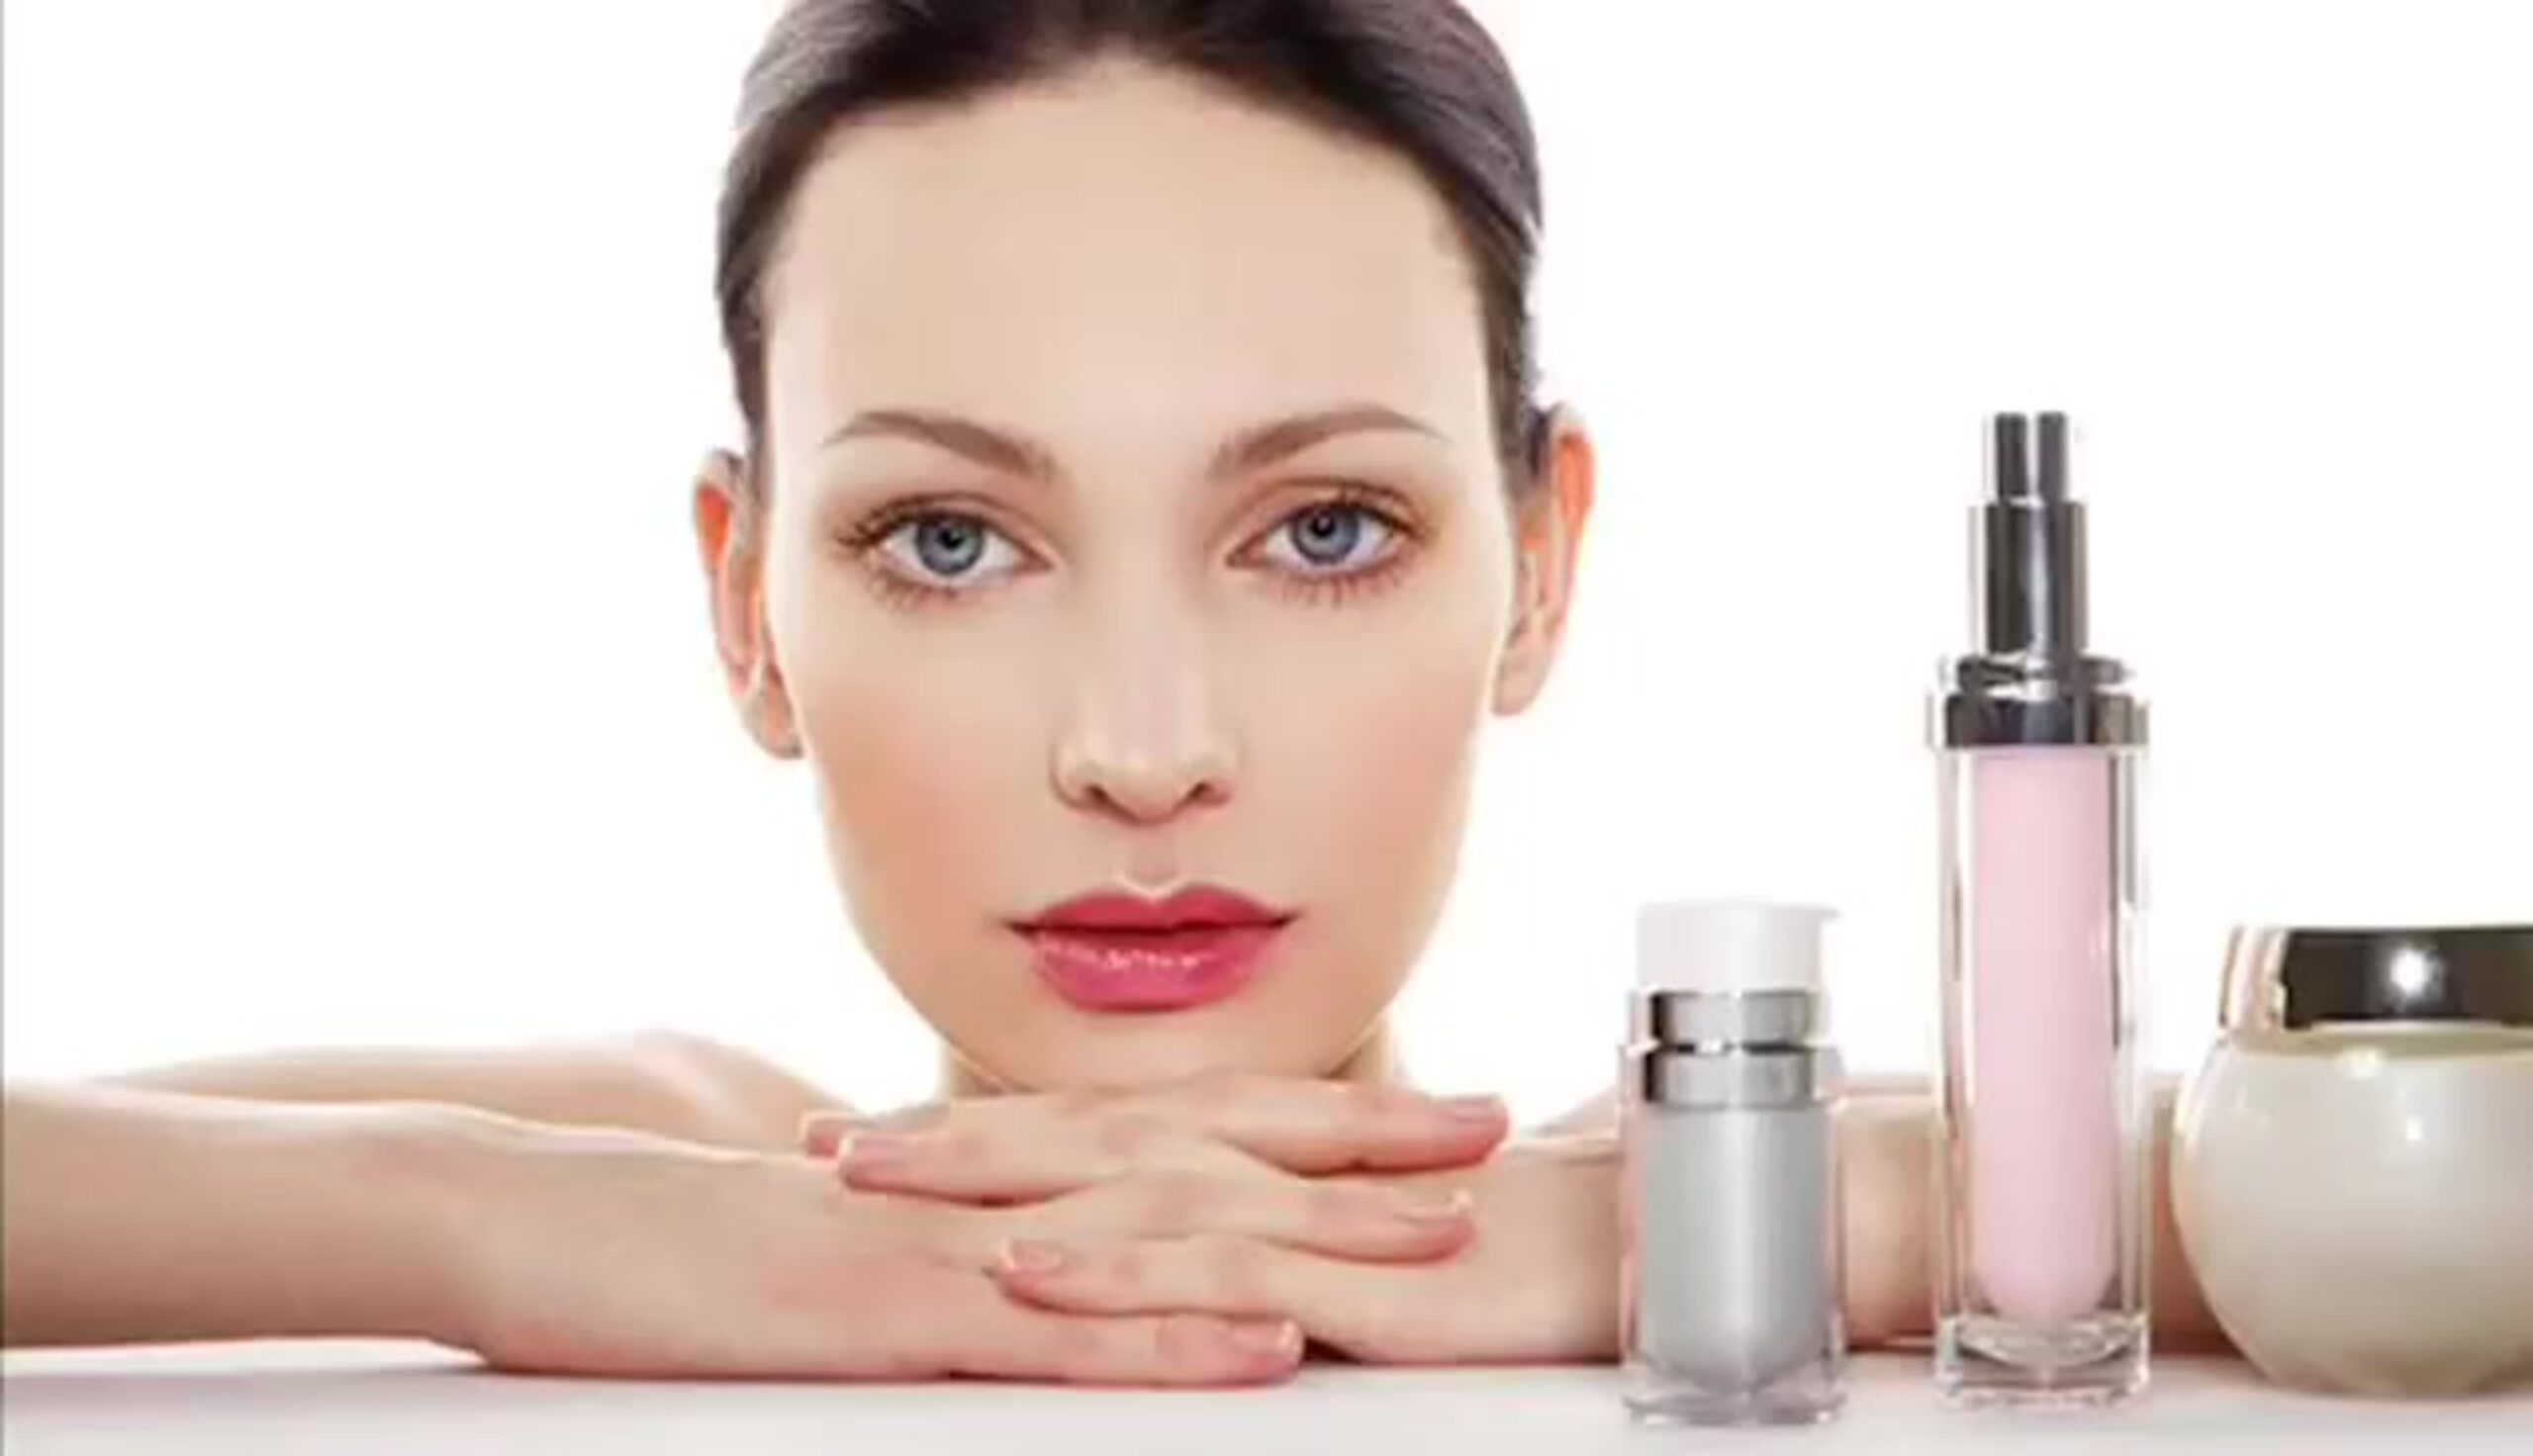 “American Beauty Innovations: The Latest in Skincare and Makeup”